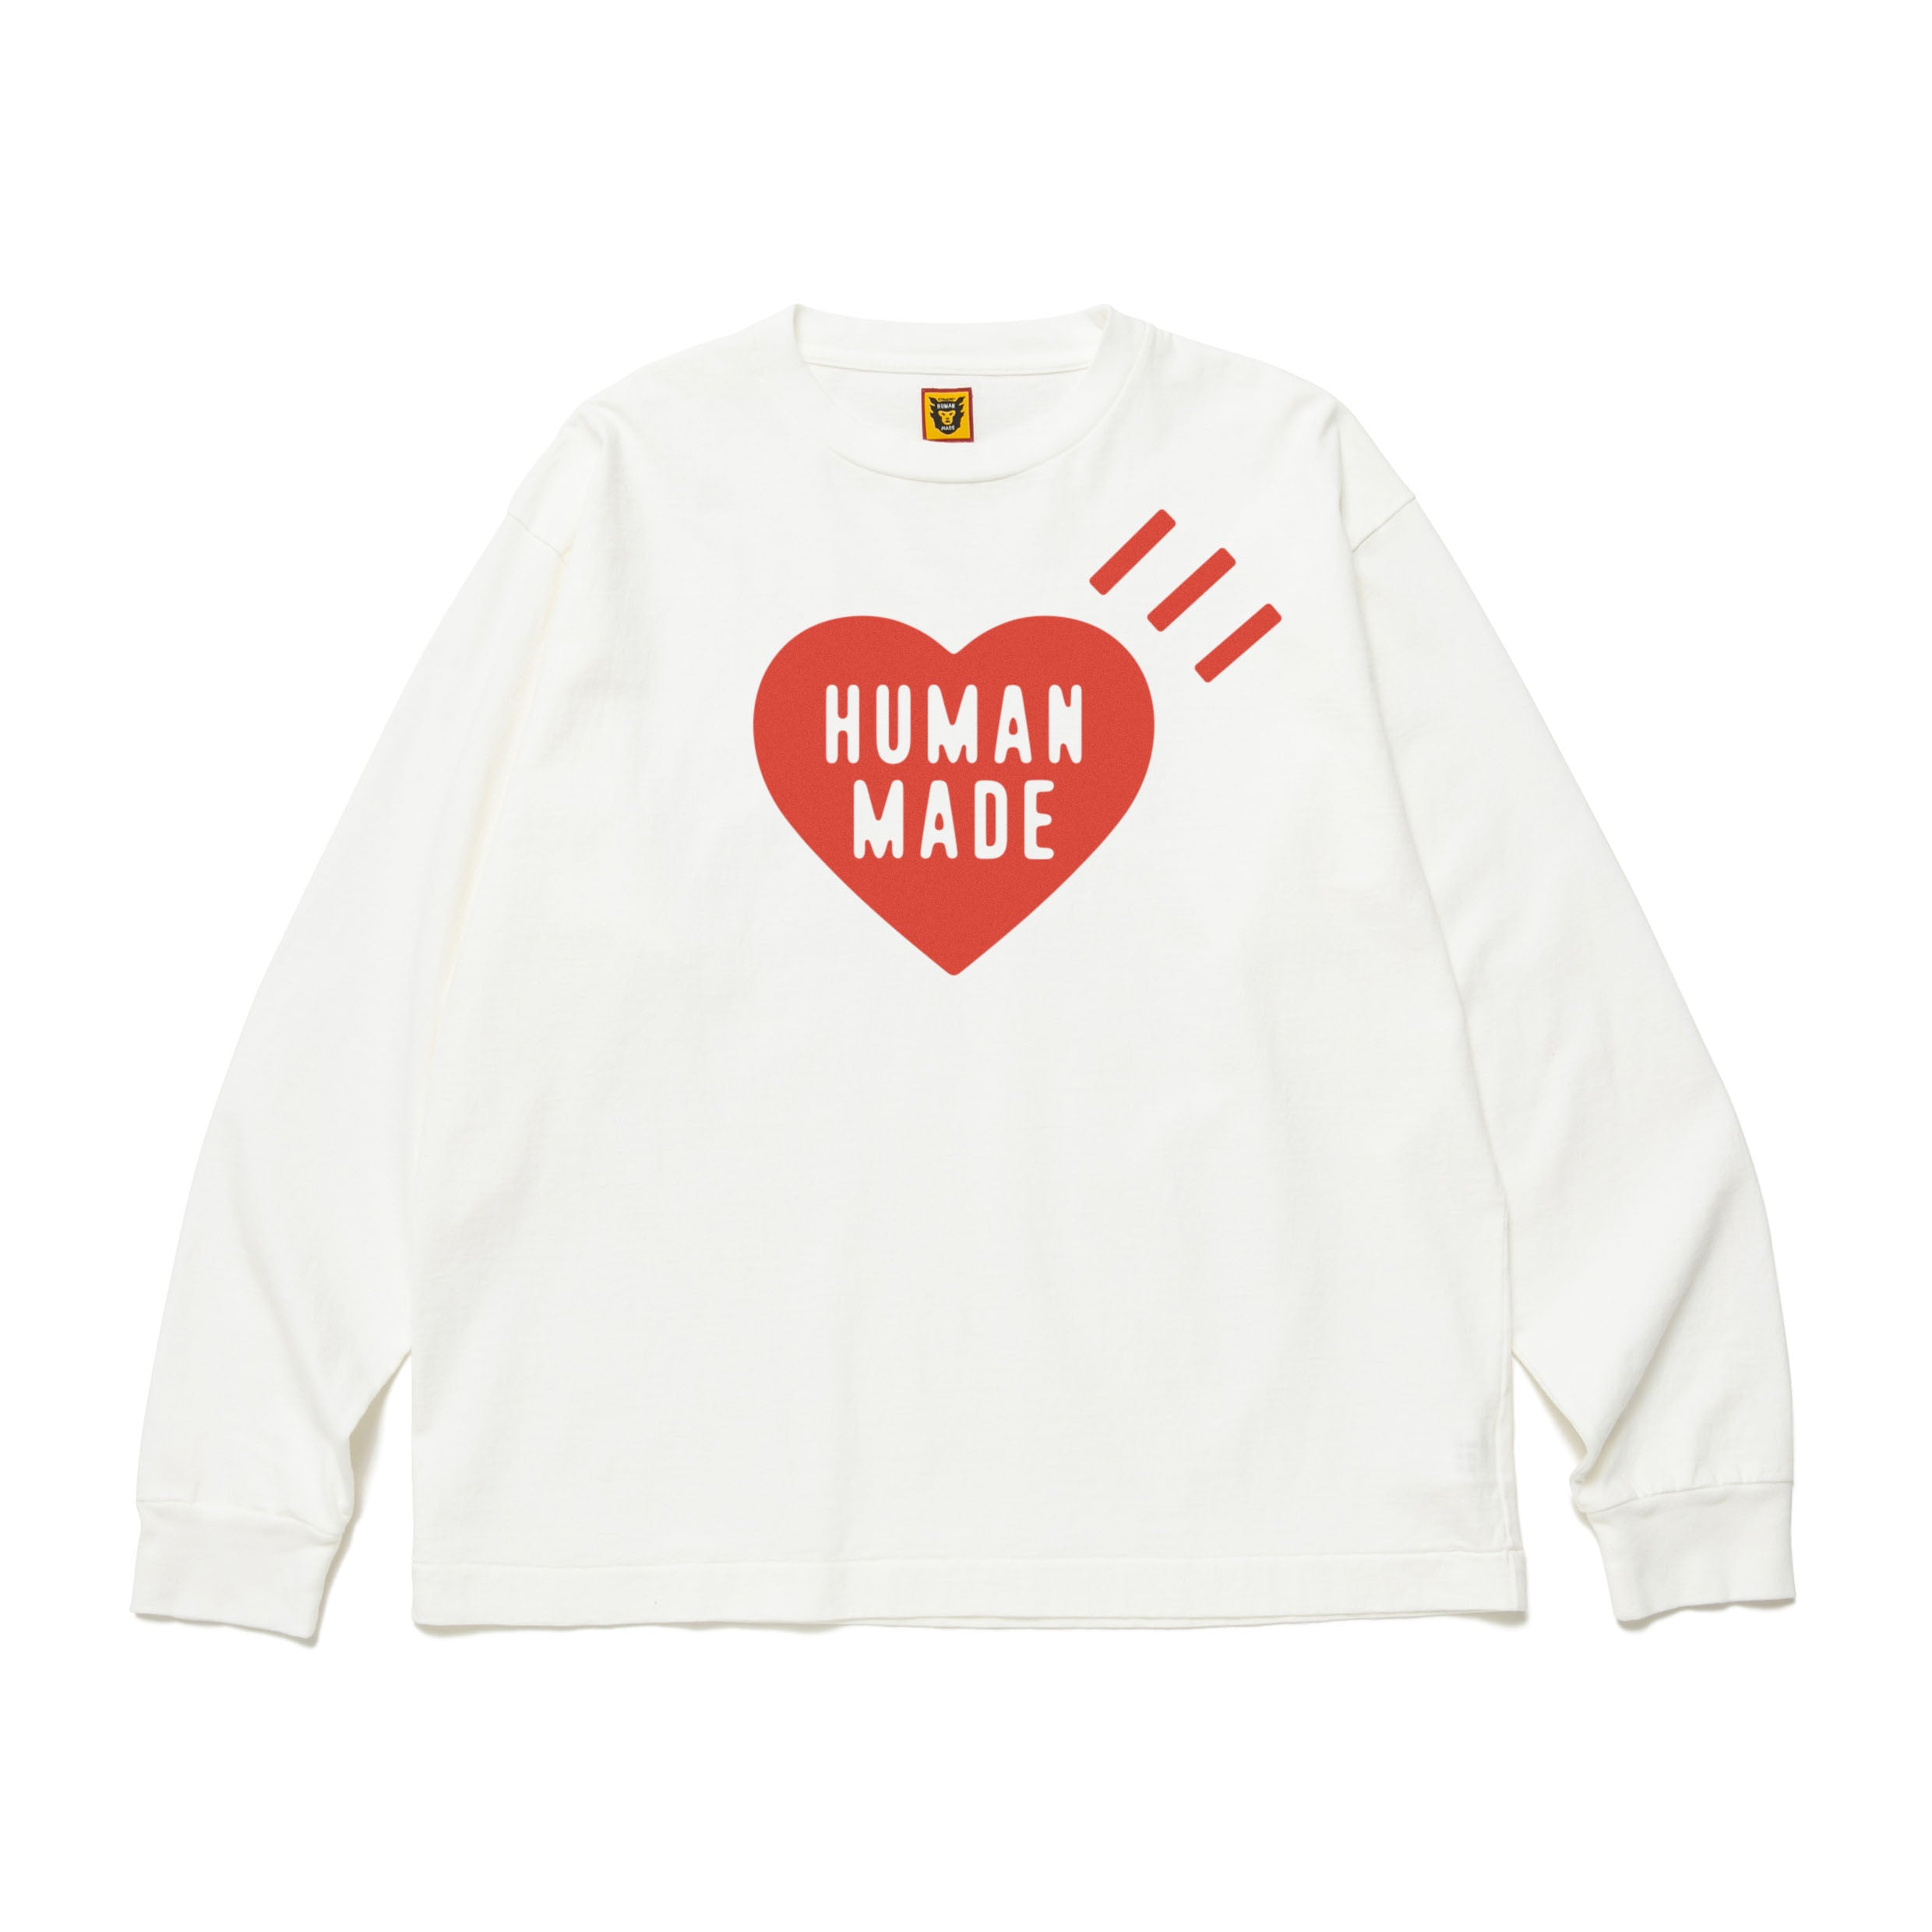 DAILY L/S T-SHIRT #261227 – HUMAN MADE ONLINE STORE